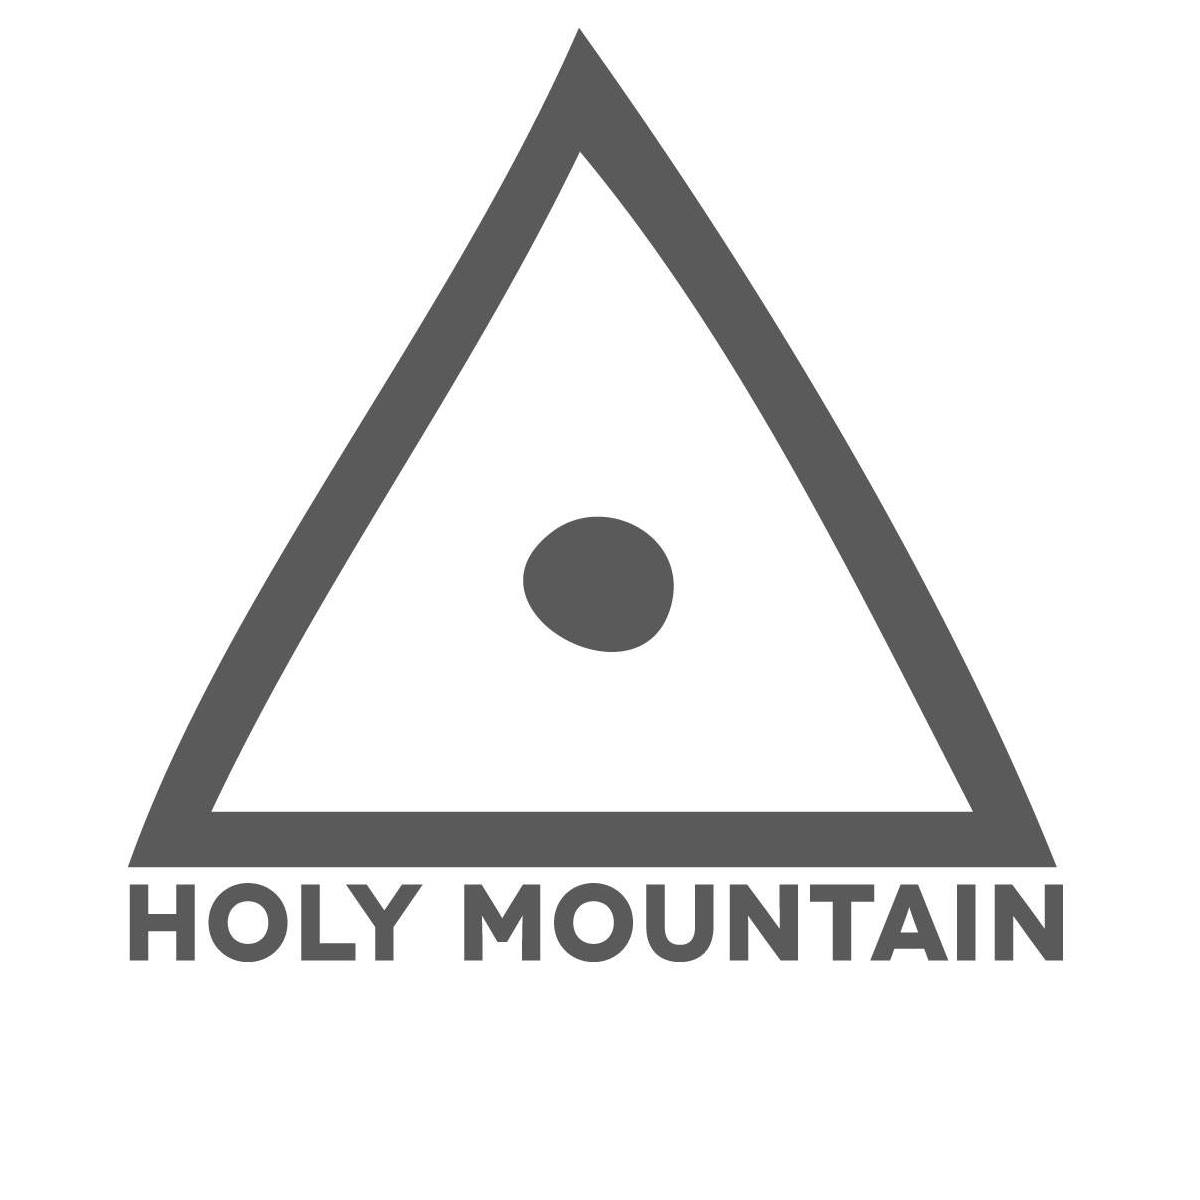 Business logo of Holy Mountain Brewing Company